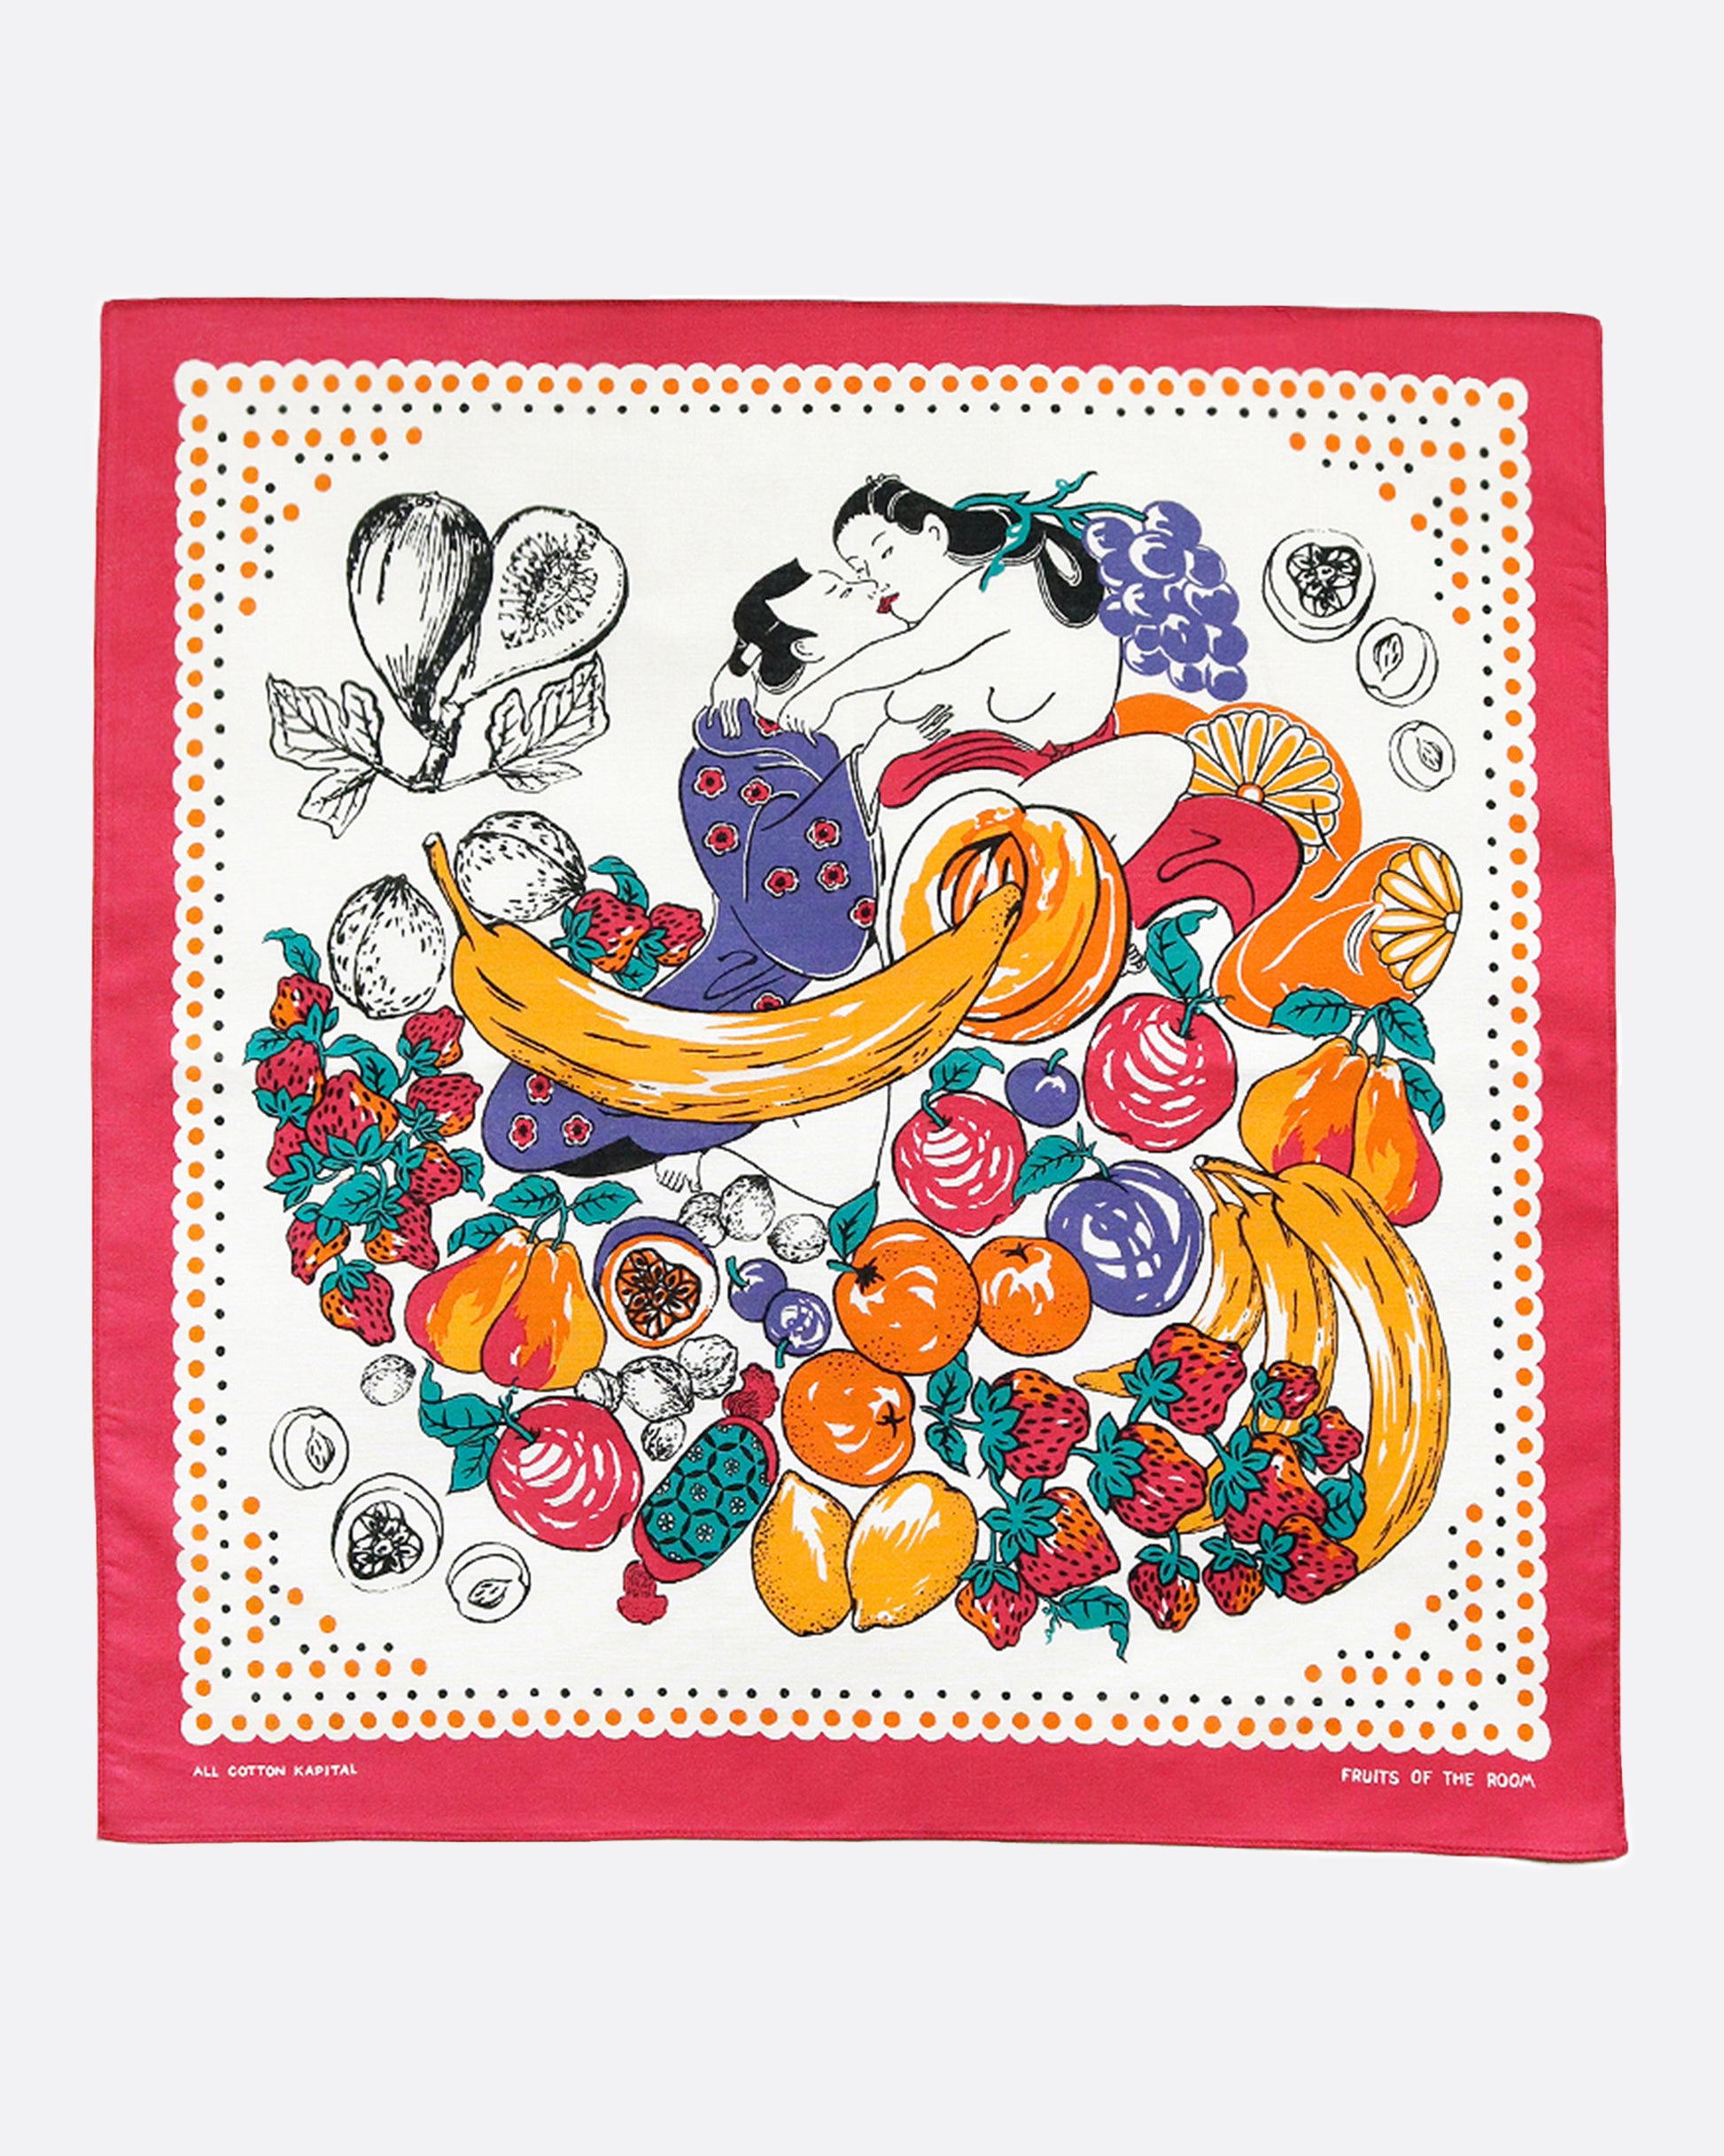 A spring painting bandana showing the "Fruits of the Room" with a colorful vintage feel.